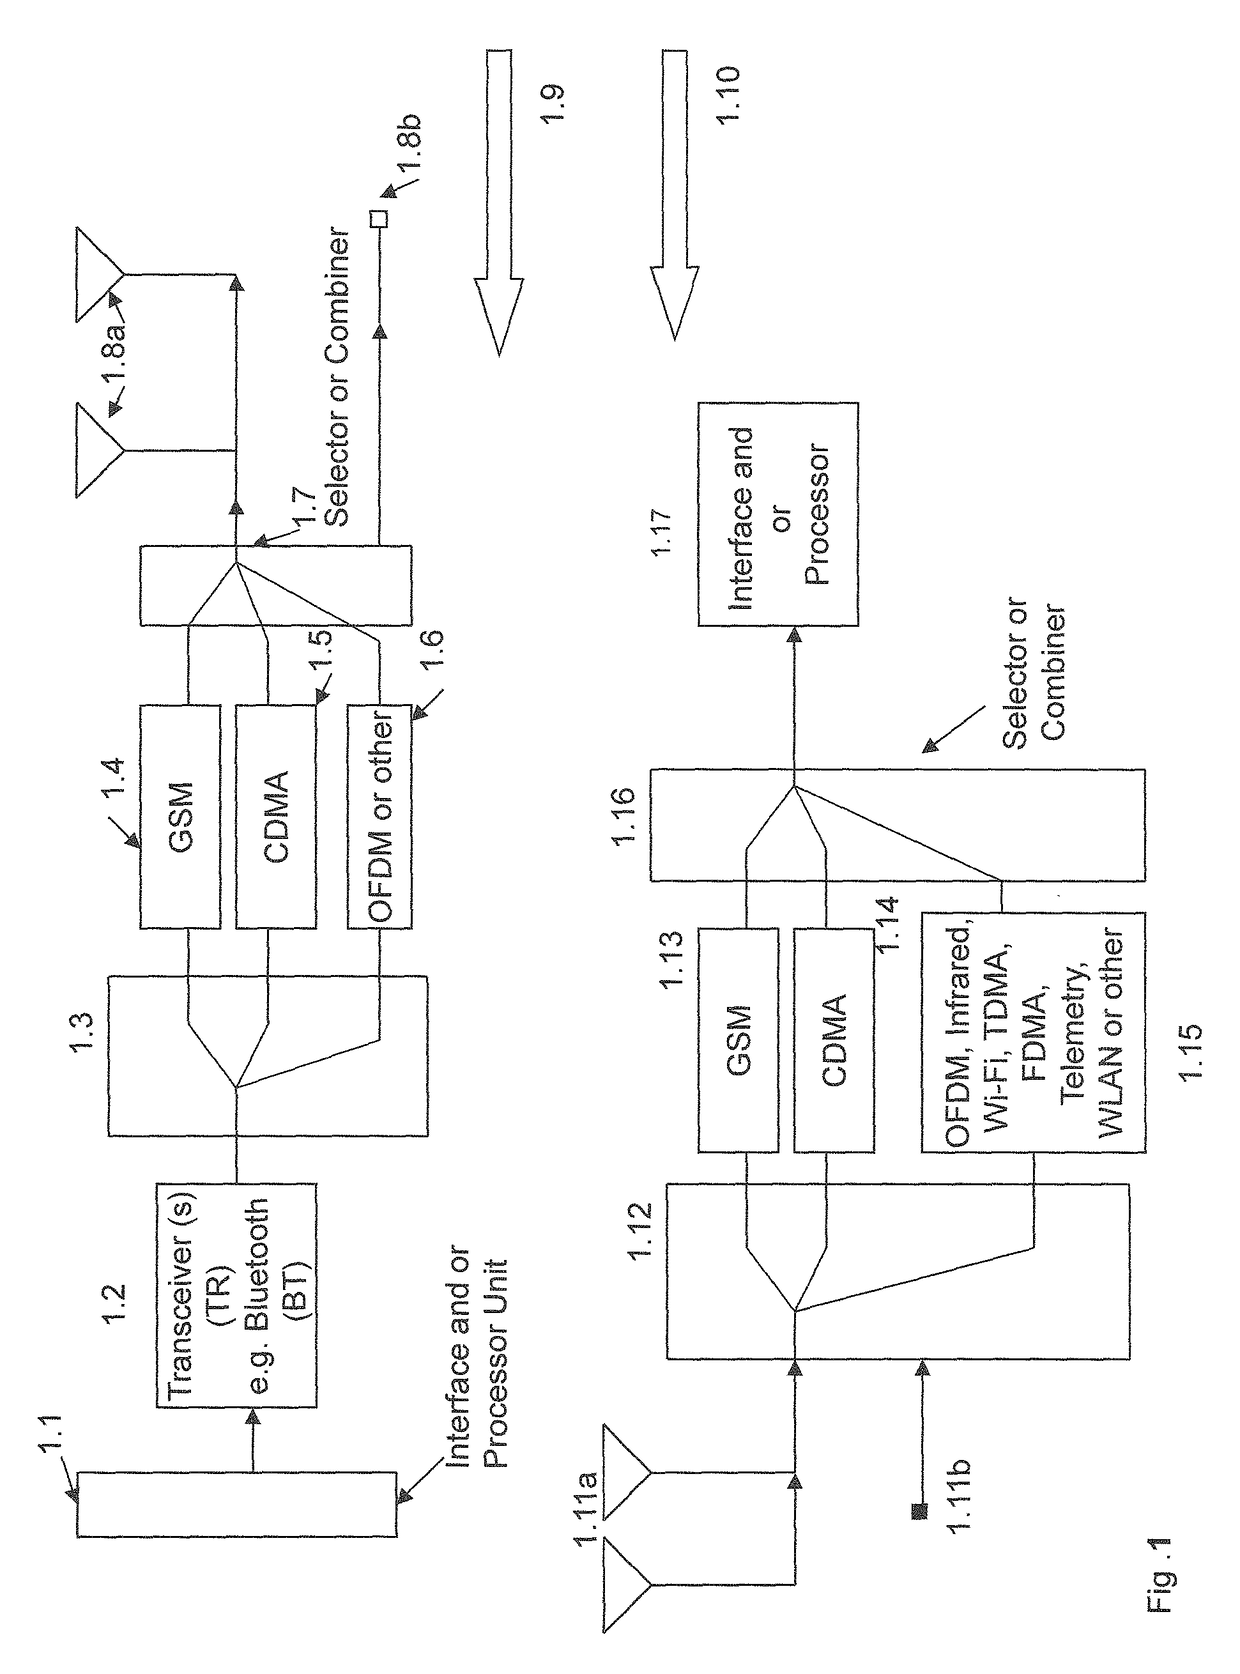 Heart rate sensor and medical diagnostics wireless devices